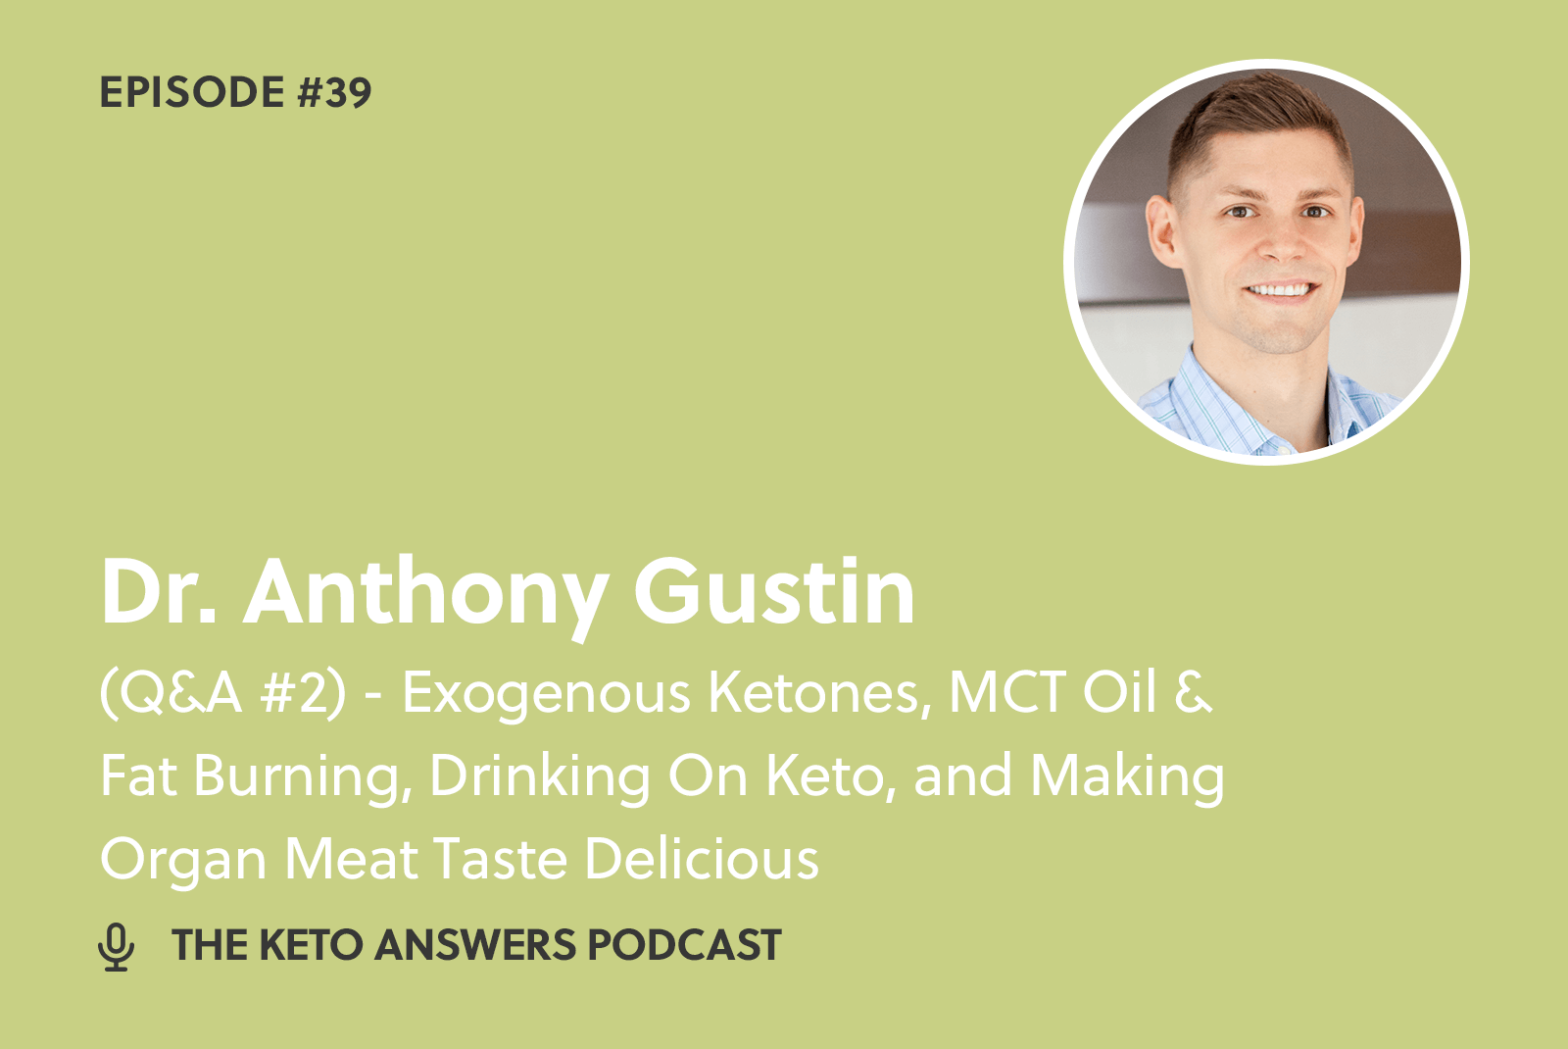 039: Dr. Anthony Gustin - (Q&A #2) - Exogenous Ketones, MCT Oil & Fat Burning, Drinking On Keto, and Making Organ Meat Taste Delicious